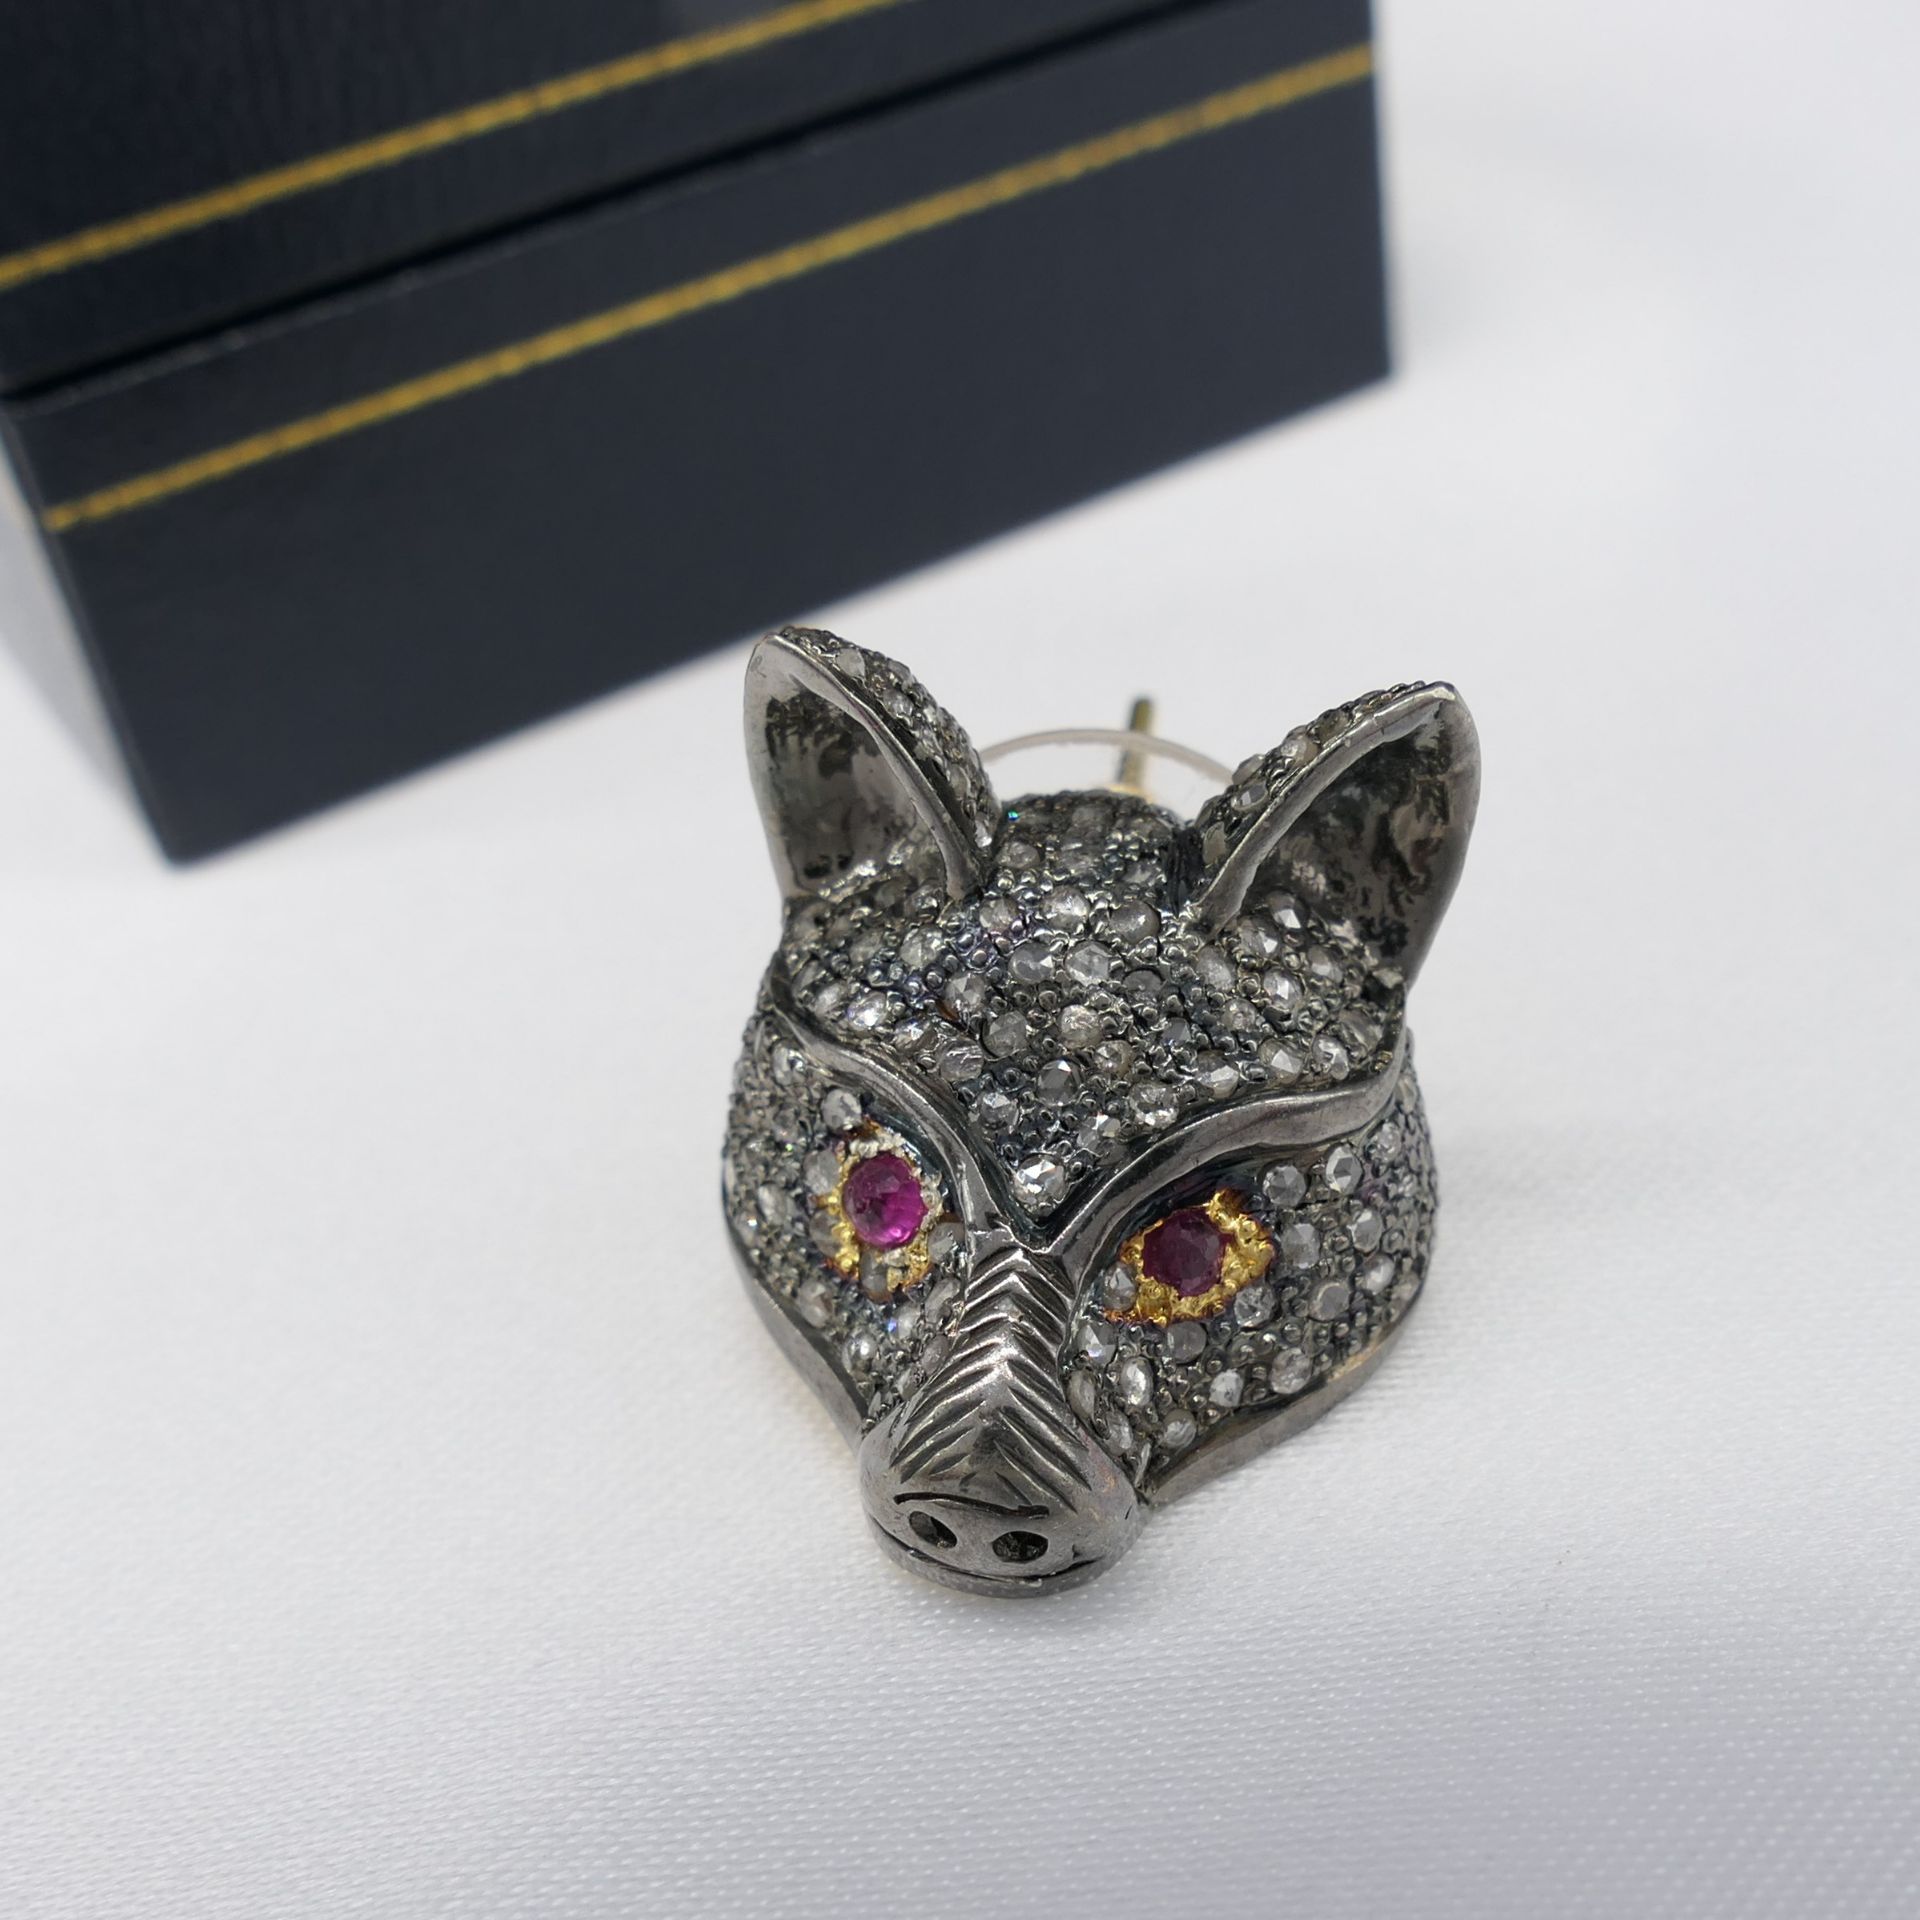 Pair of Unusual Diamond Encrusted Fox-Themed Earrings With Ruby-set Eyes, Boxed - Image 5 of 6